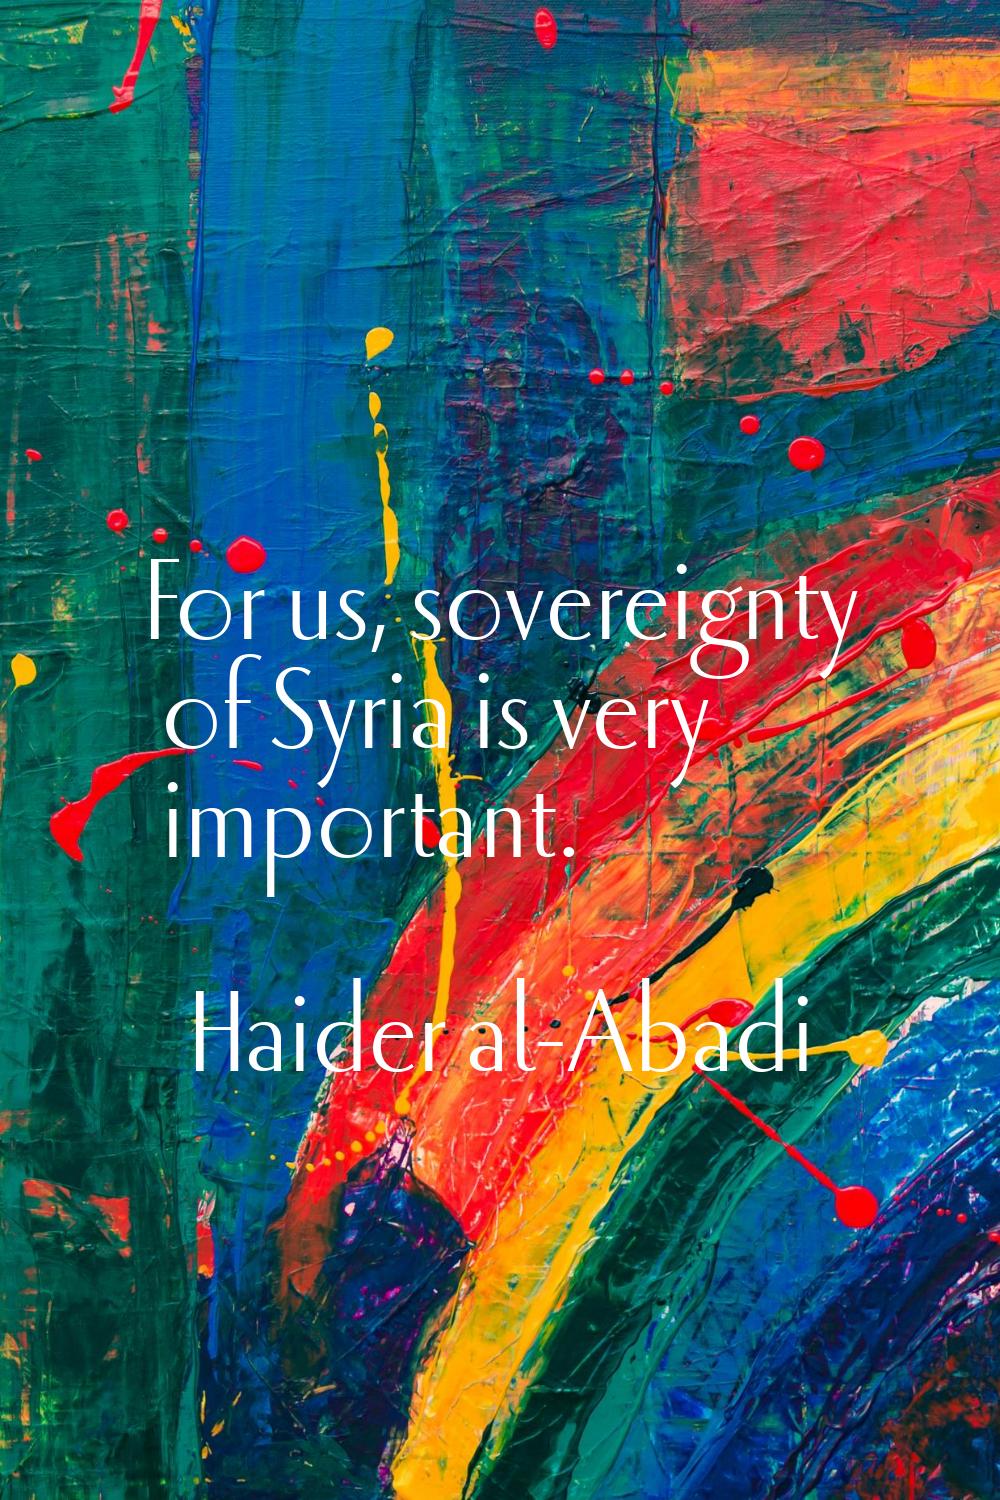 For us, sovereignty of Syria is very important.